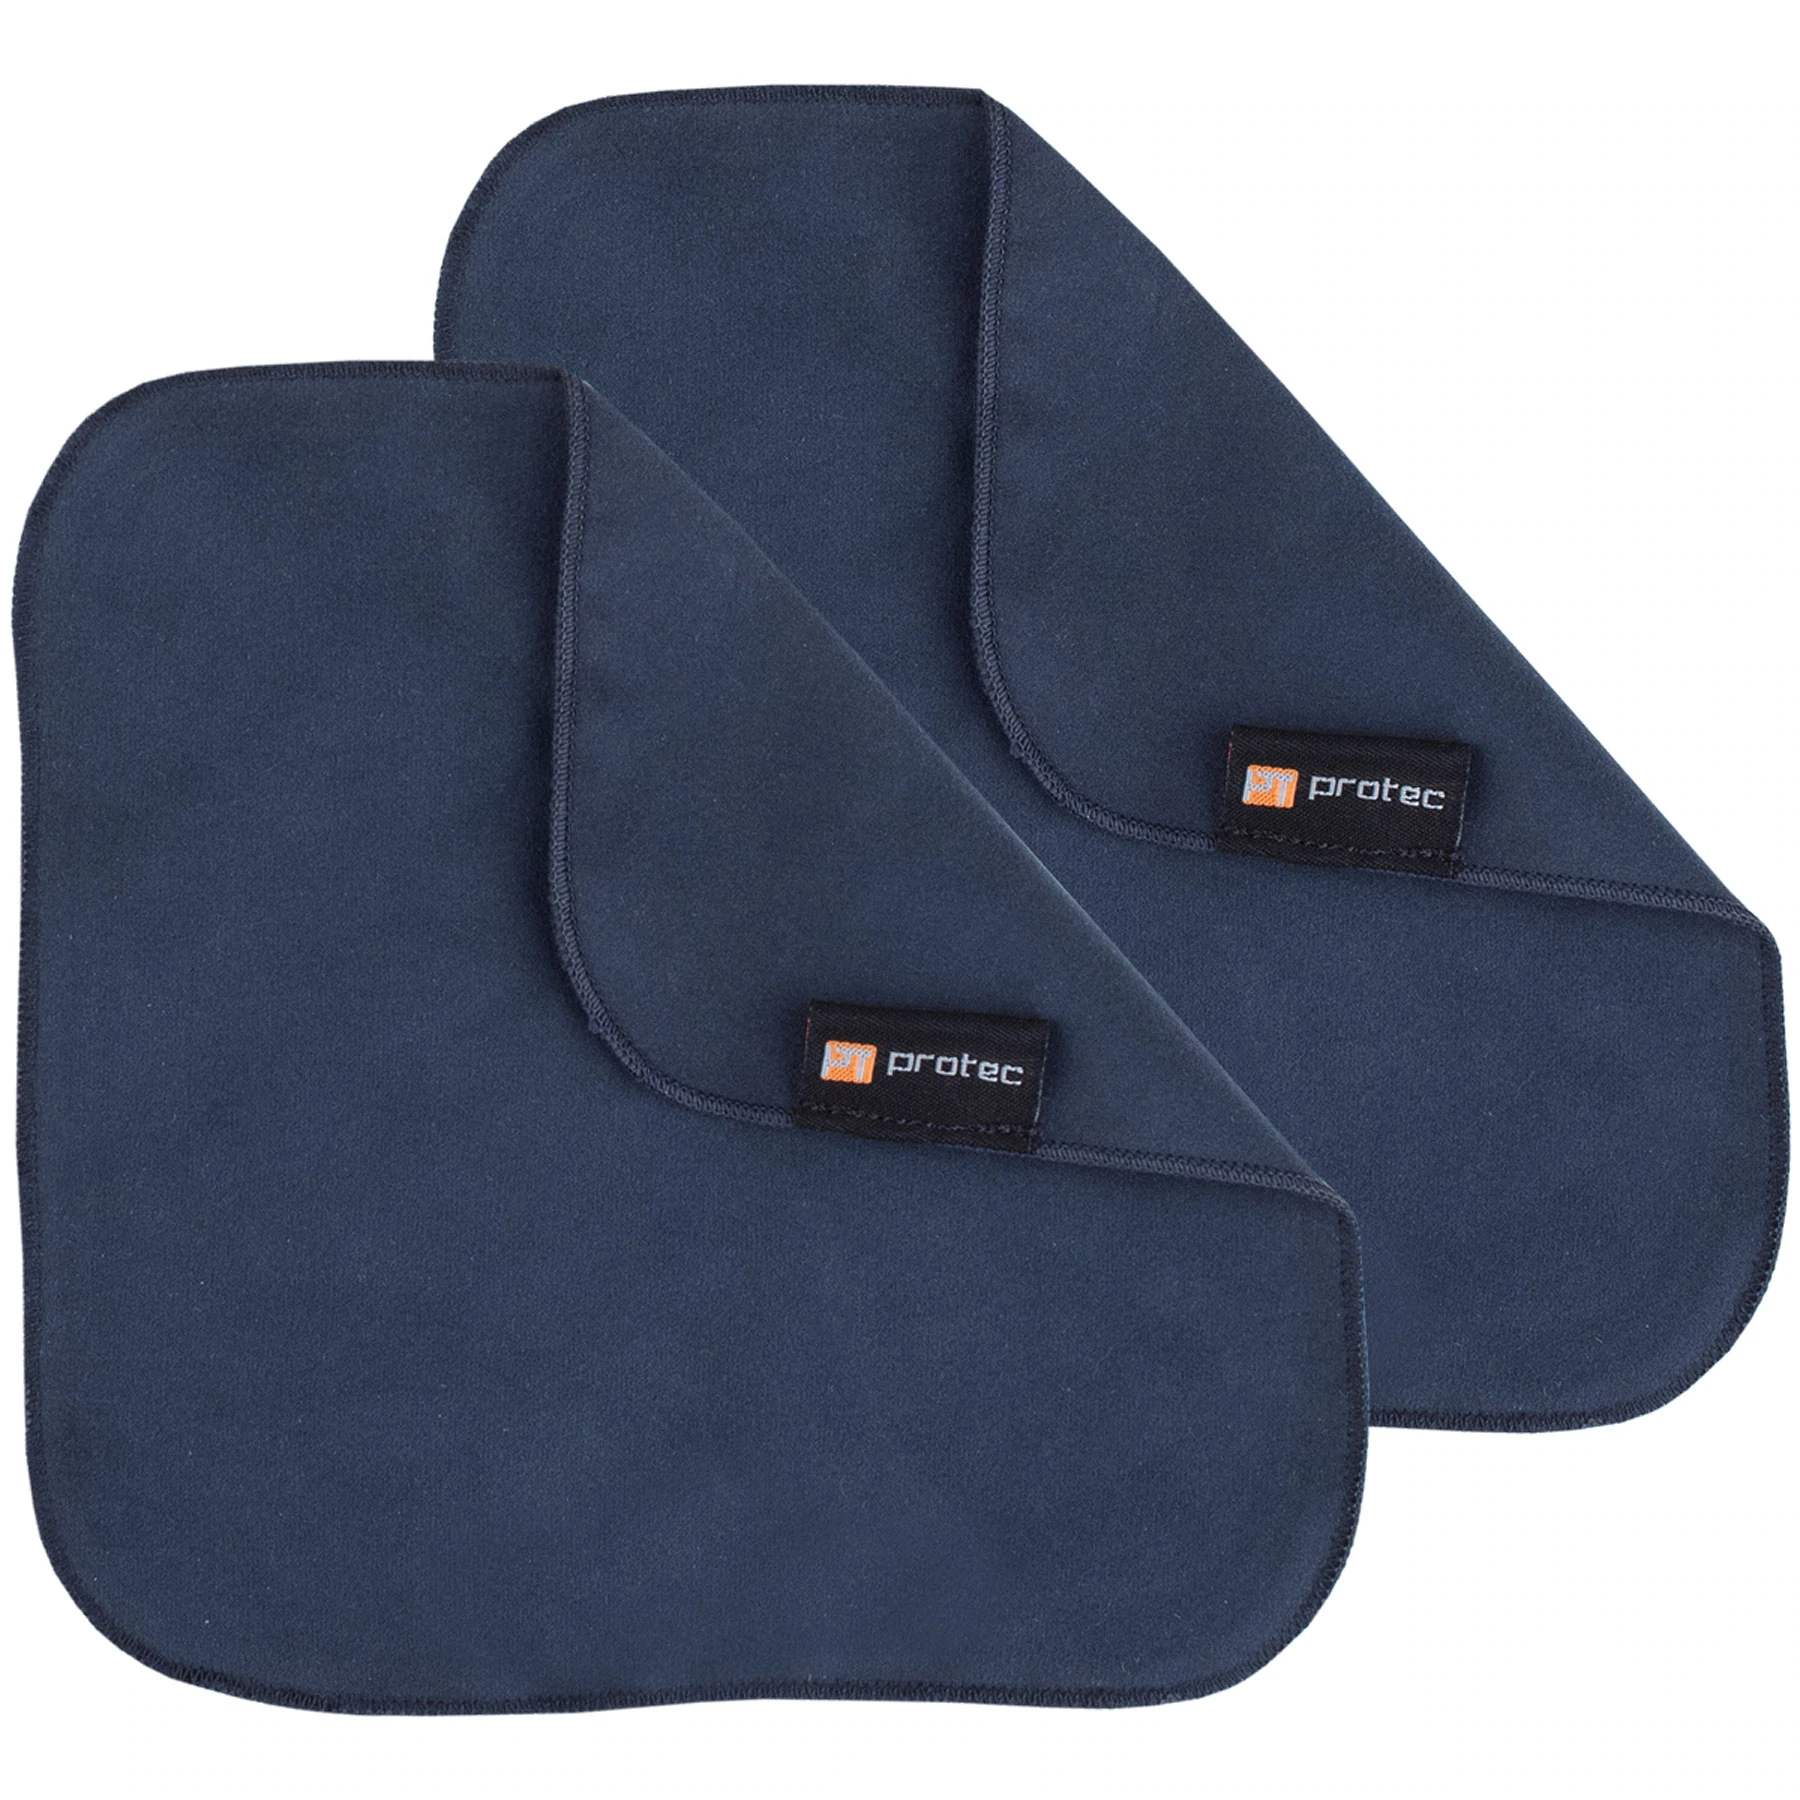 PROTEC 7 x 7" Microfiber Cleaning Cloth